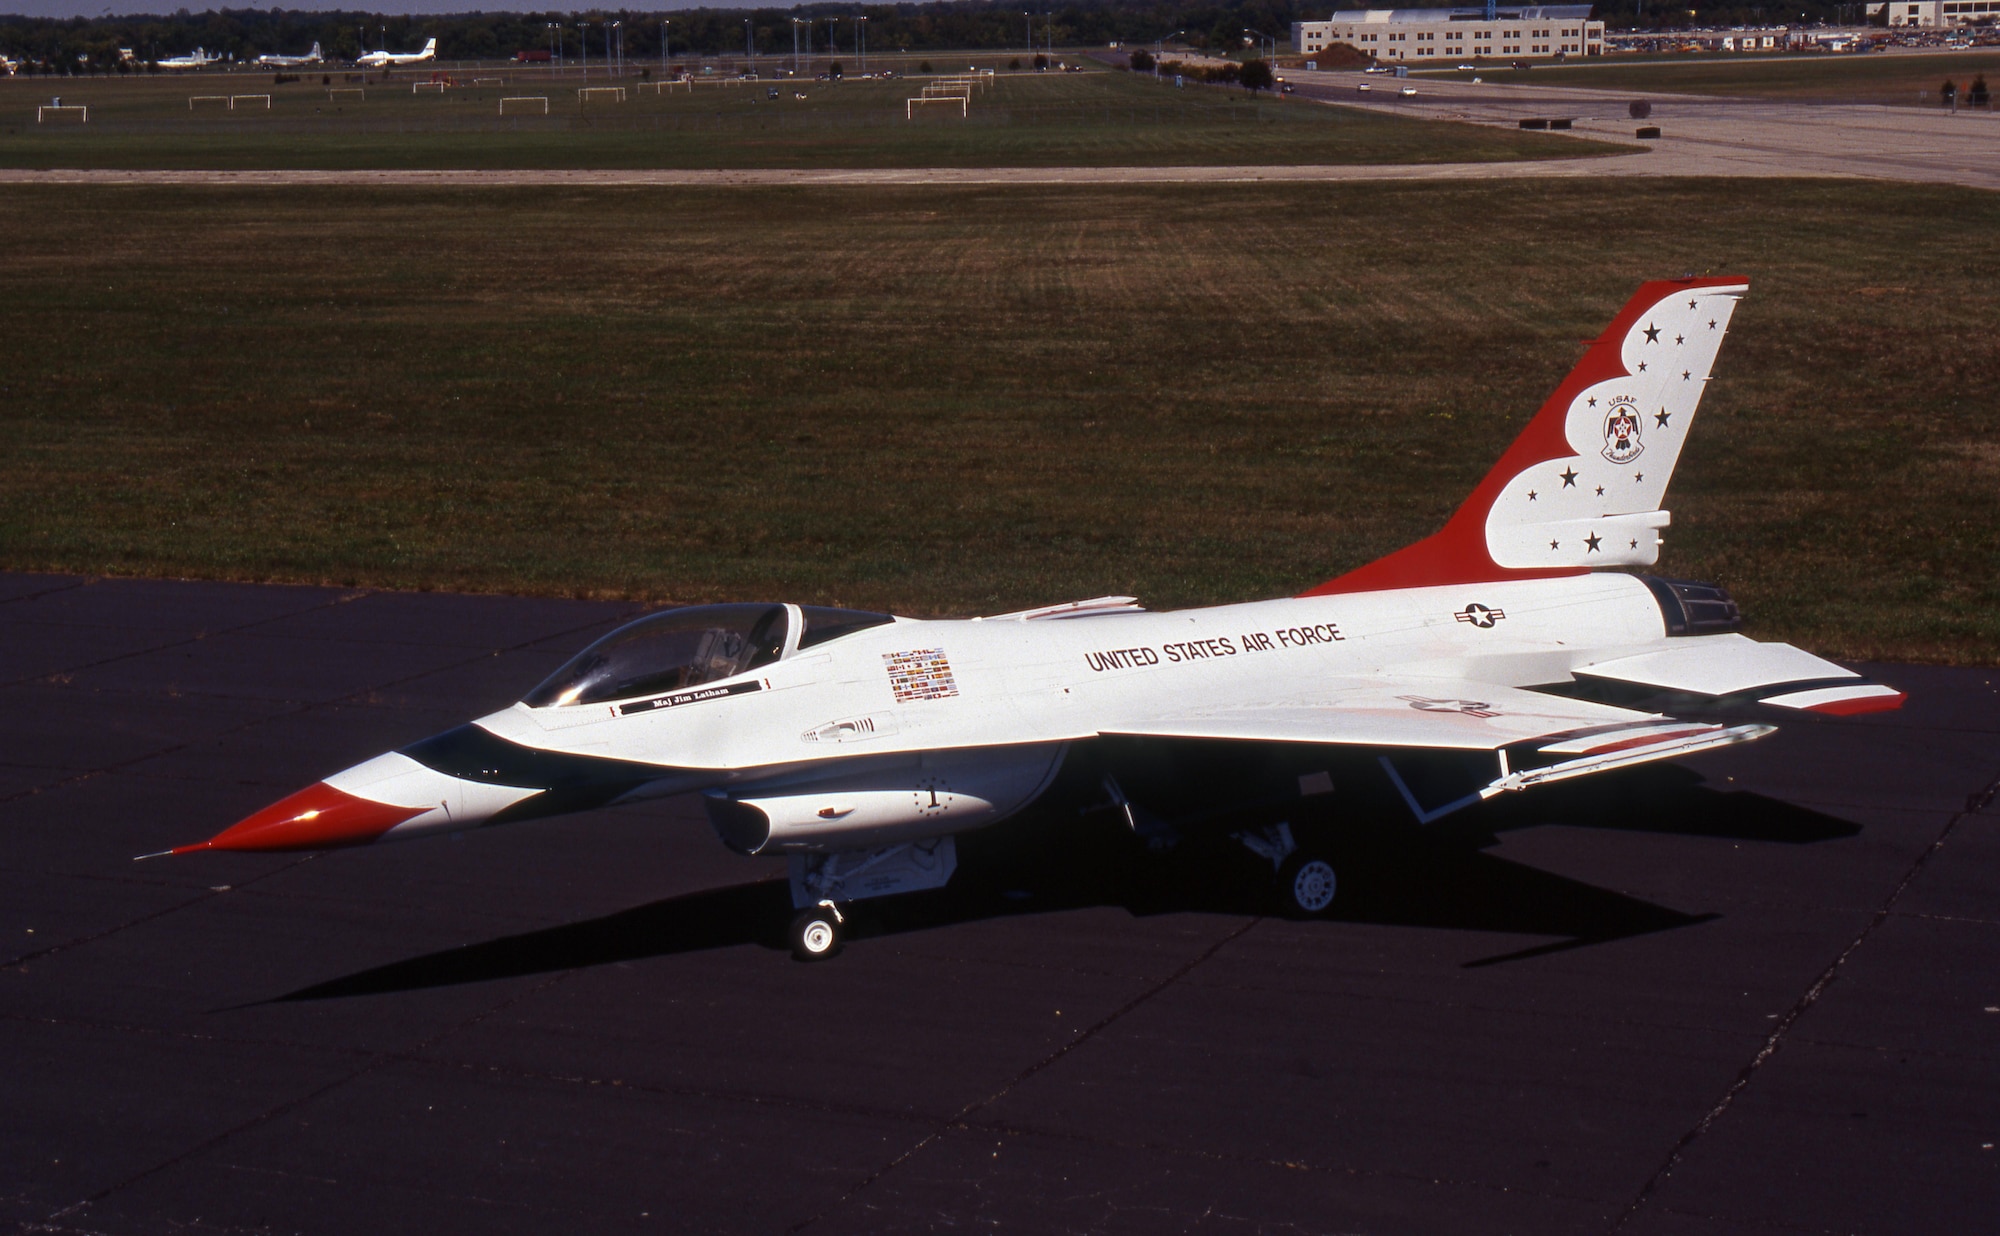 DAYTON, Ohio -- General Dynamics F-16A Fighting Falcon at the National Museum of the United States Air Force. (U.S. Air Force photo)